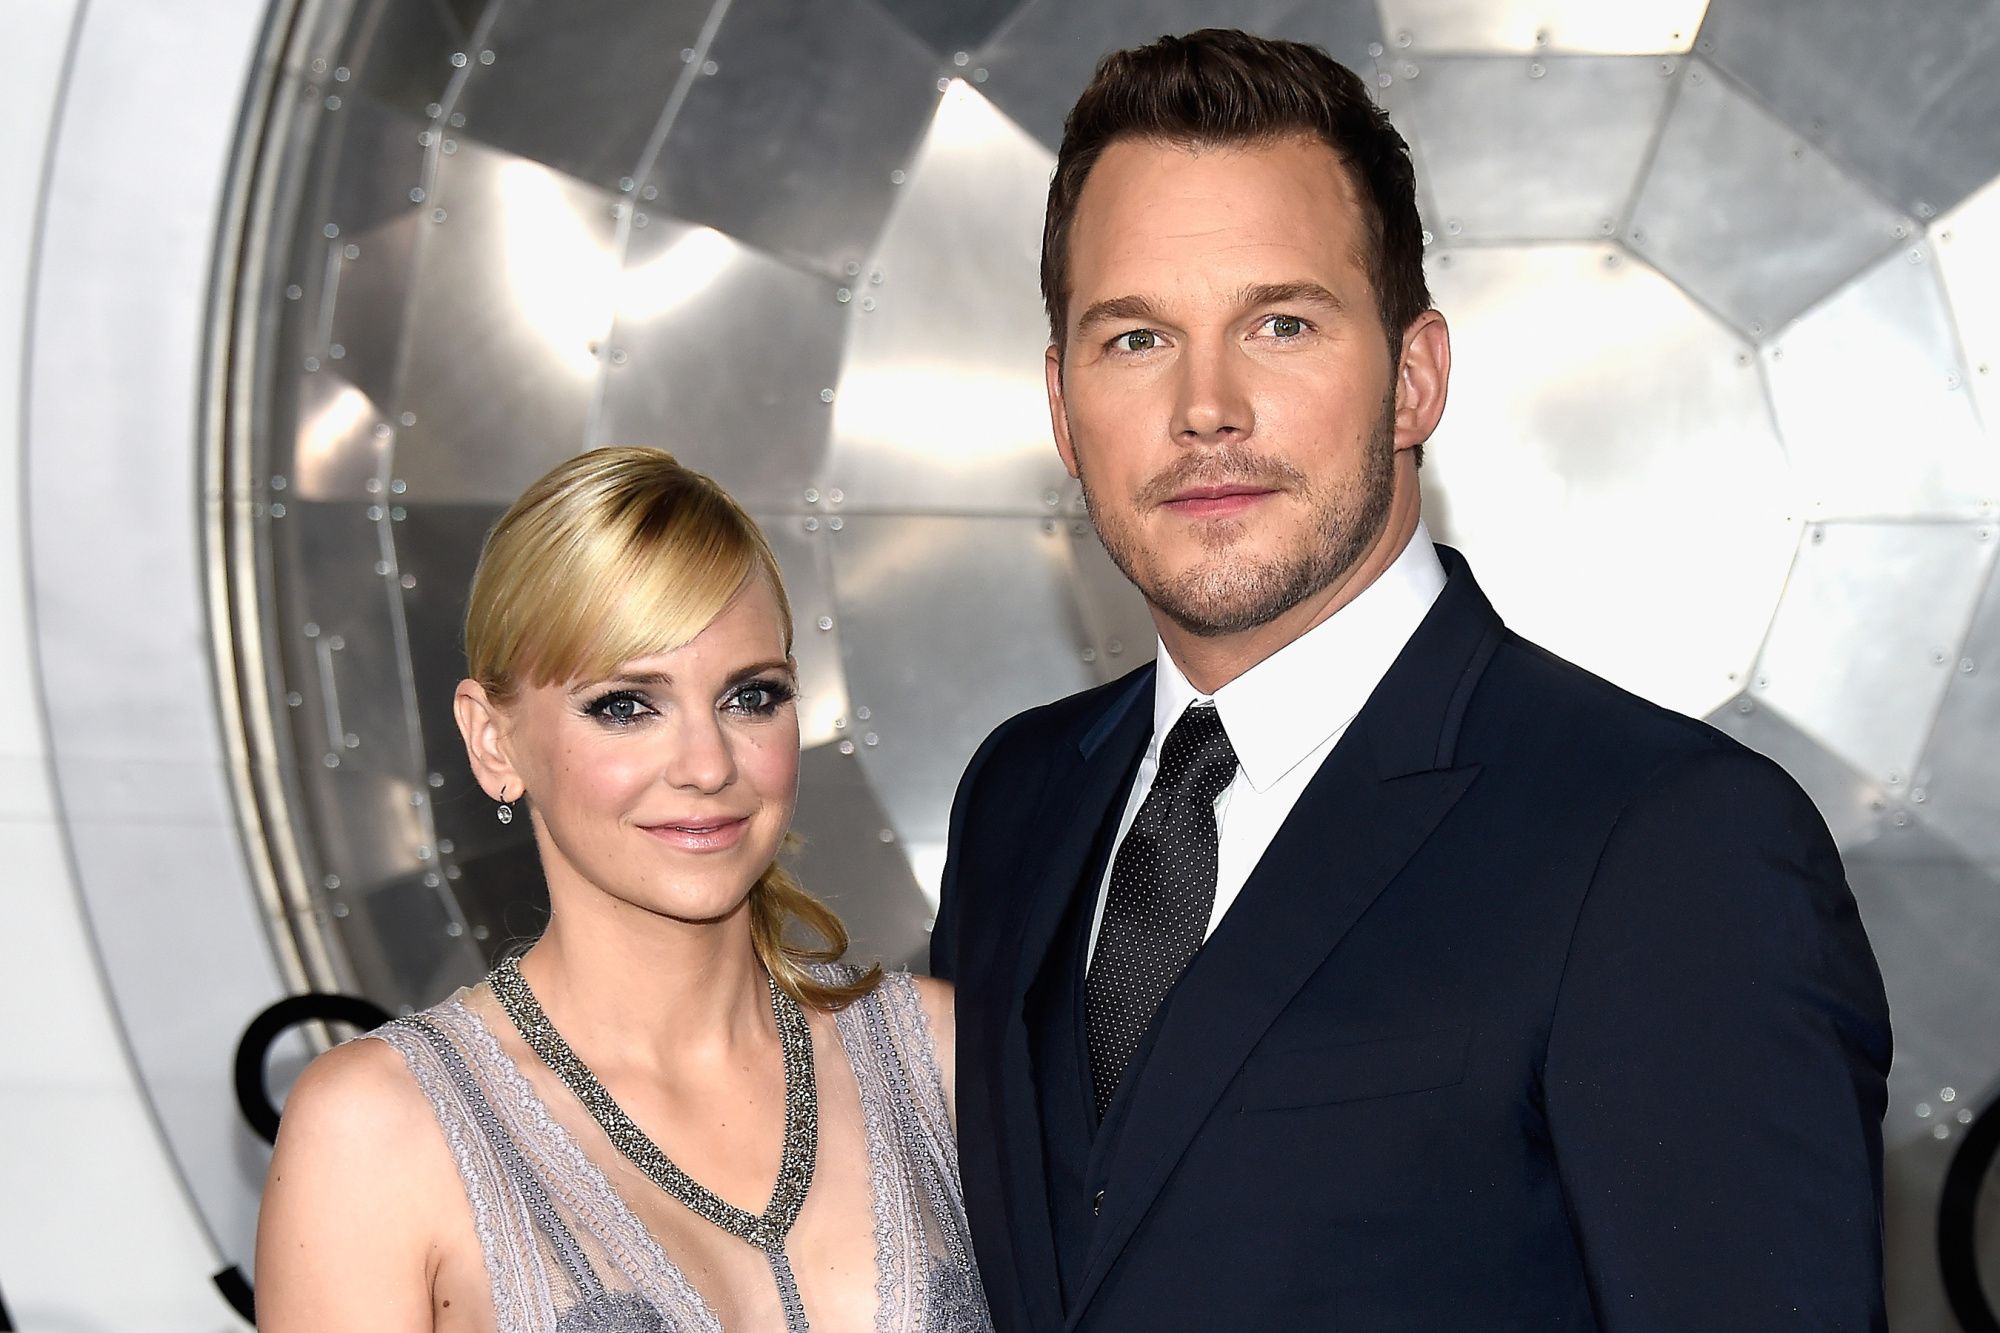 Anna Faris and Chris Pratt during the premiere of Columbia Pictures' "Passengers" at Regency Village Theatre on December 14, 2016 in Westwood, California | Source: Getty Images